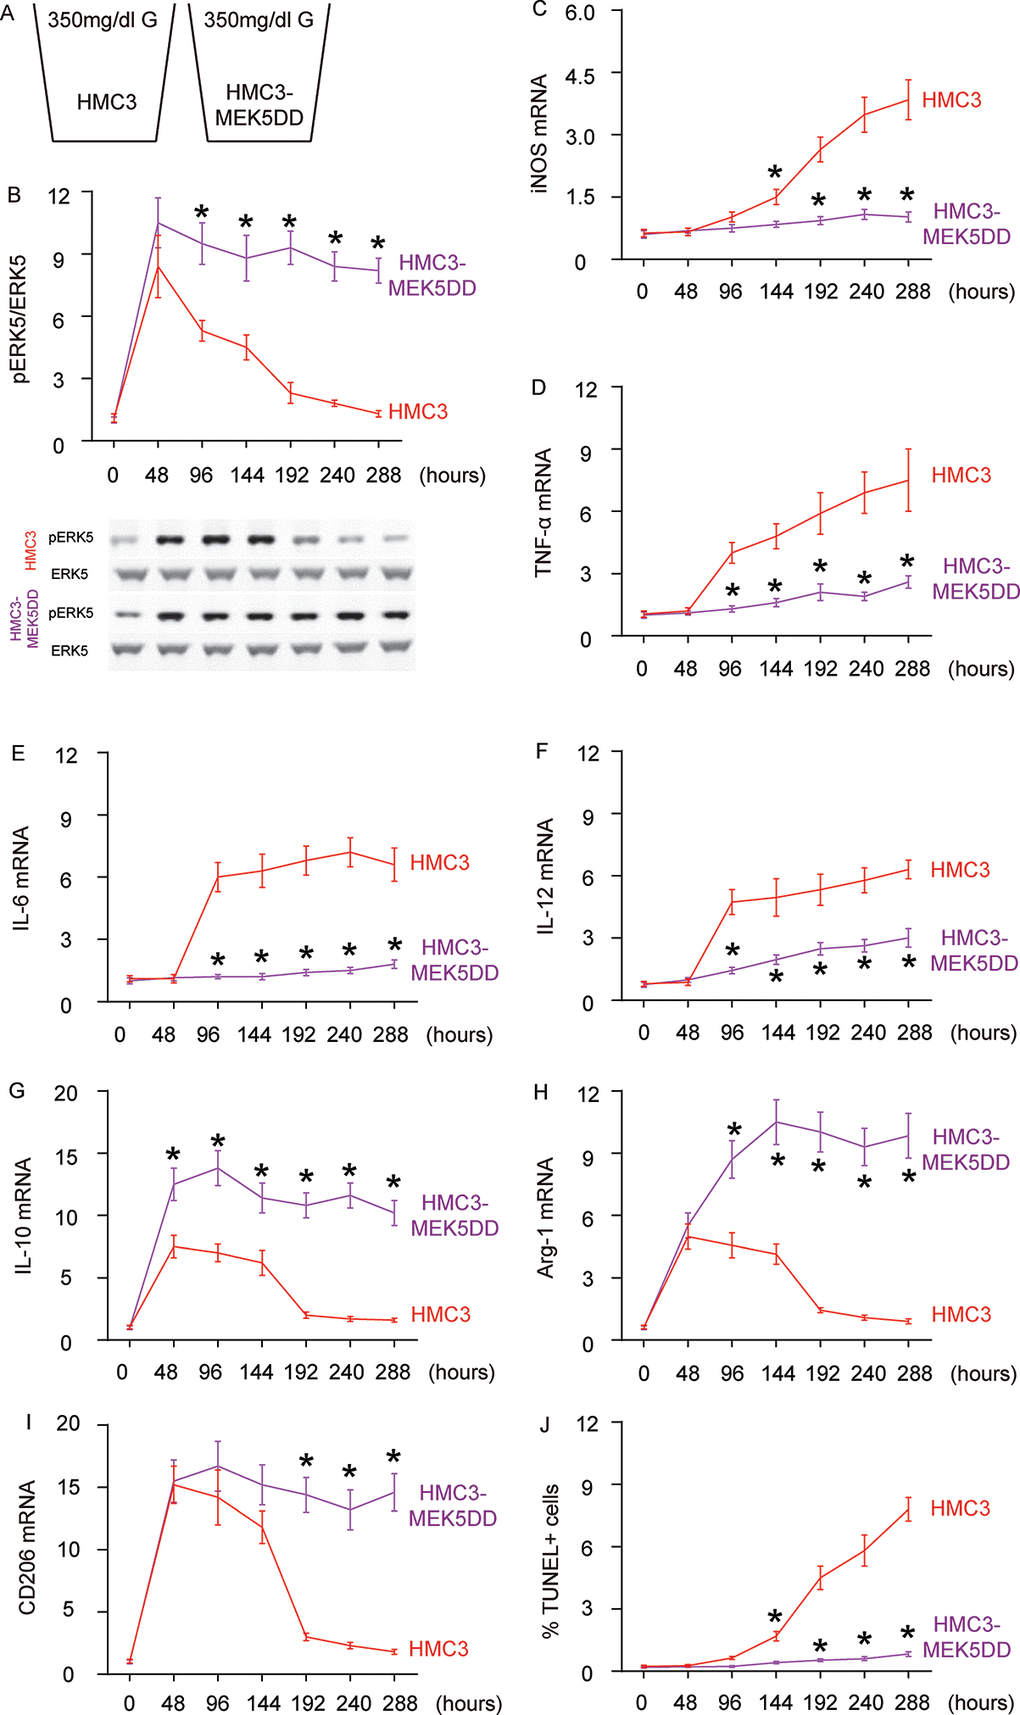 Sustained ERK5 activation maintains HG-induced M2a polarization of microglia. (A) HG-culturing of MEK5DD-transfected and control microglia. (B) Western blot for pERK5, compared to the total ERK5 levels in HG- cultured, MEK5DD-transfected and control microglia at different time courses. (C–I) RT-qPCR for iNOS (C), TNF-α (D), IL-6 (E), IL-12 (F), IL-10 (G), Arg-1 (H) and CD206 (I) mRNA levels in HG- cultured, MEK5DD-transfected and control microglia at different time points. (J) TUNEL assay on HCN-2 cells. N=5. *p